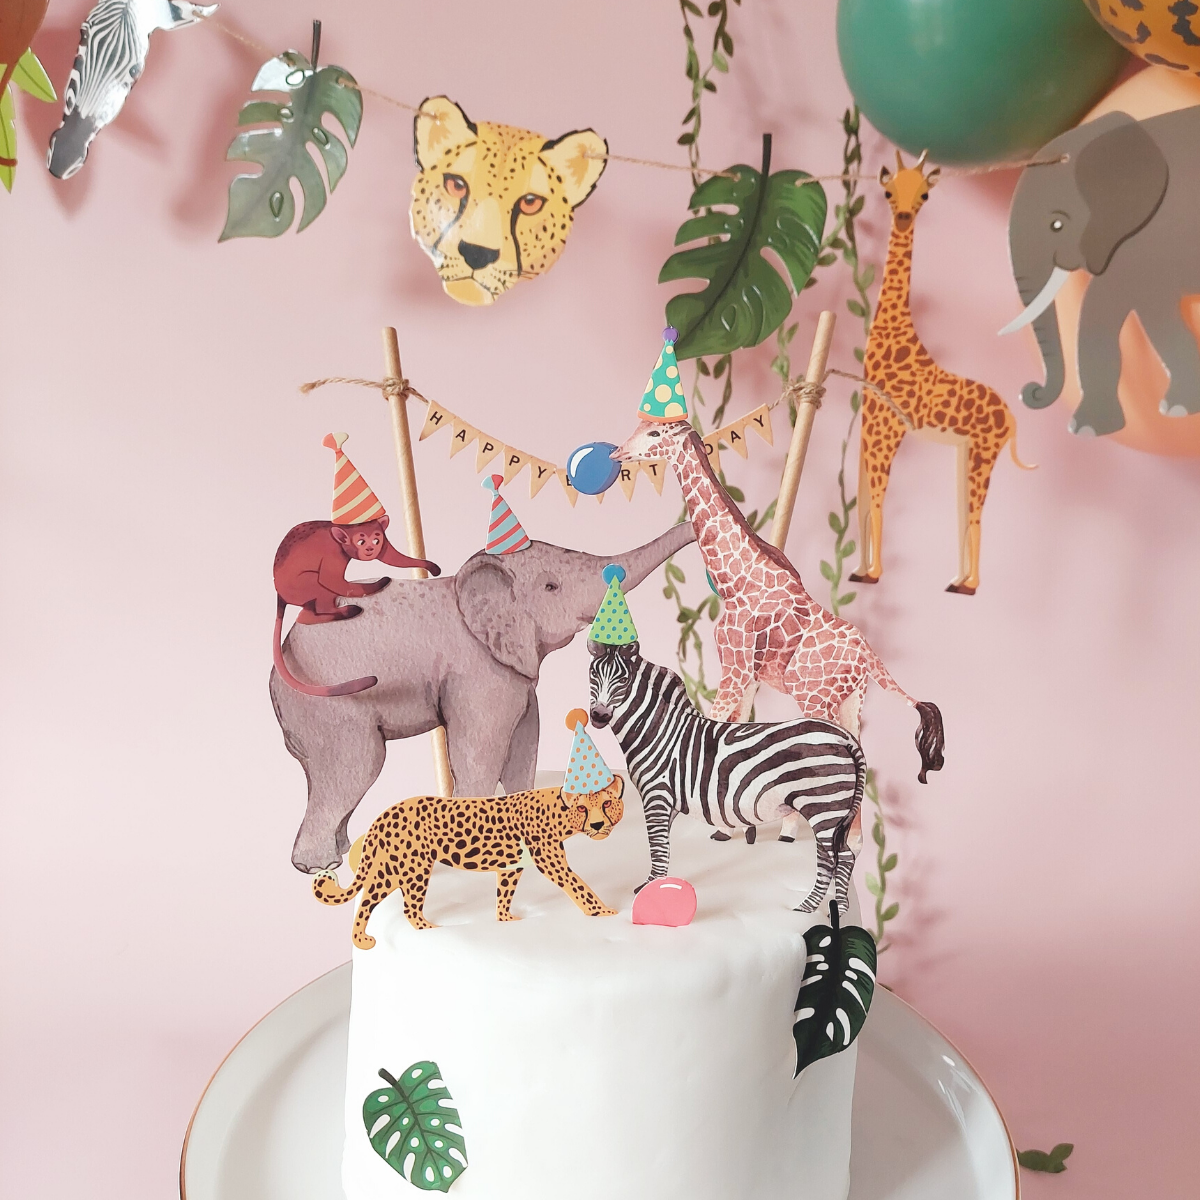 4 Easy and Cute Animal Themed Cakes - Cake by Courtney